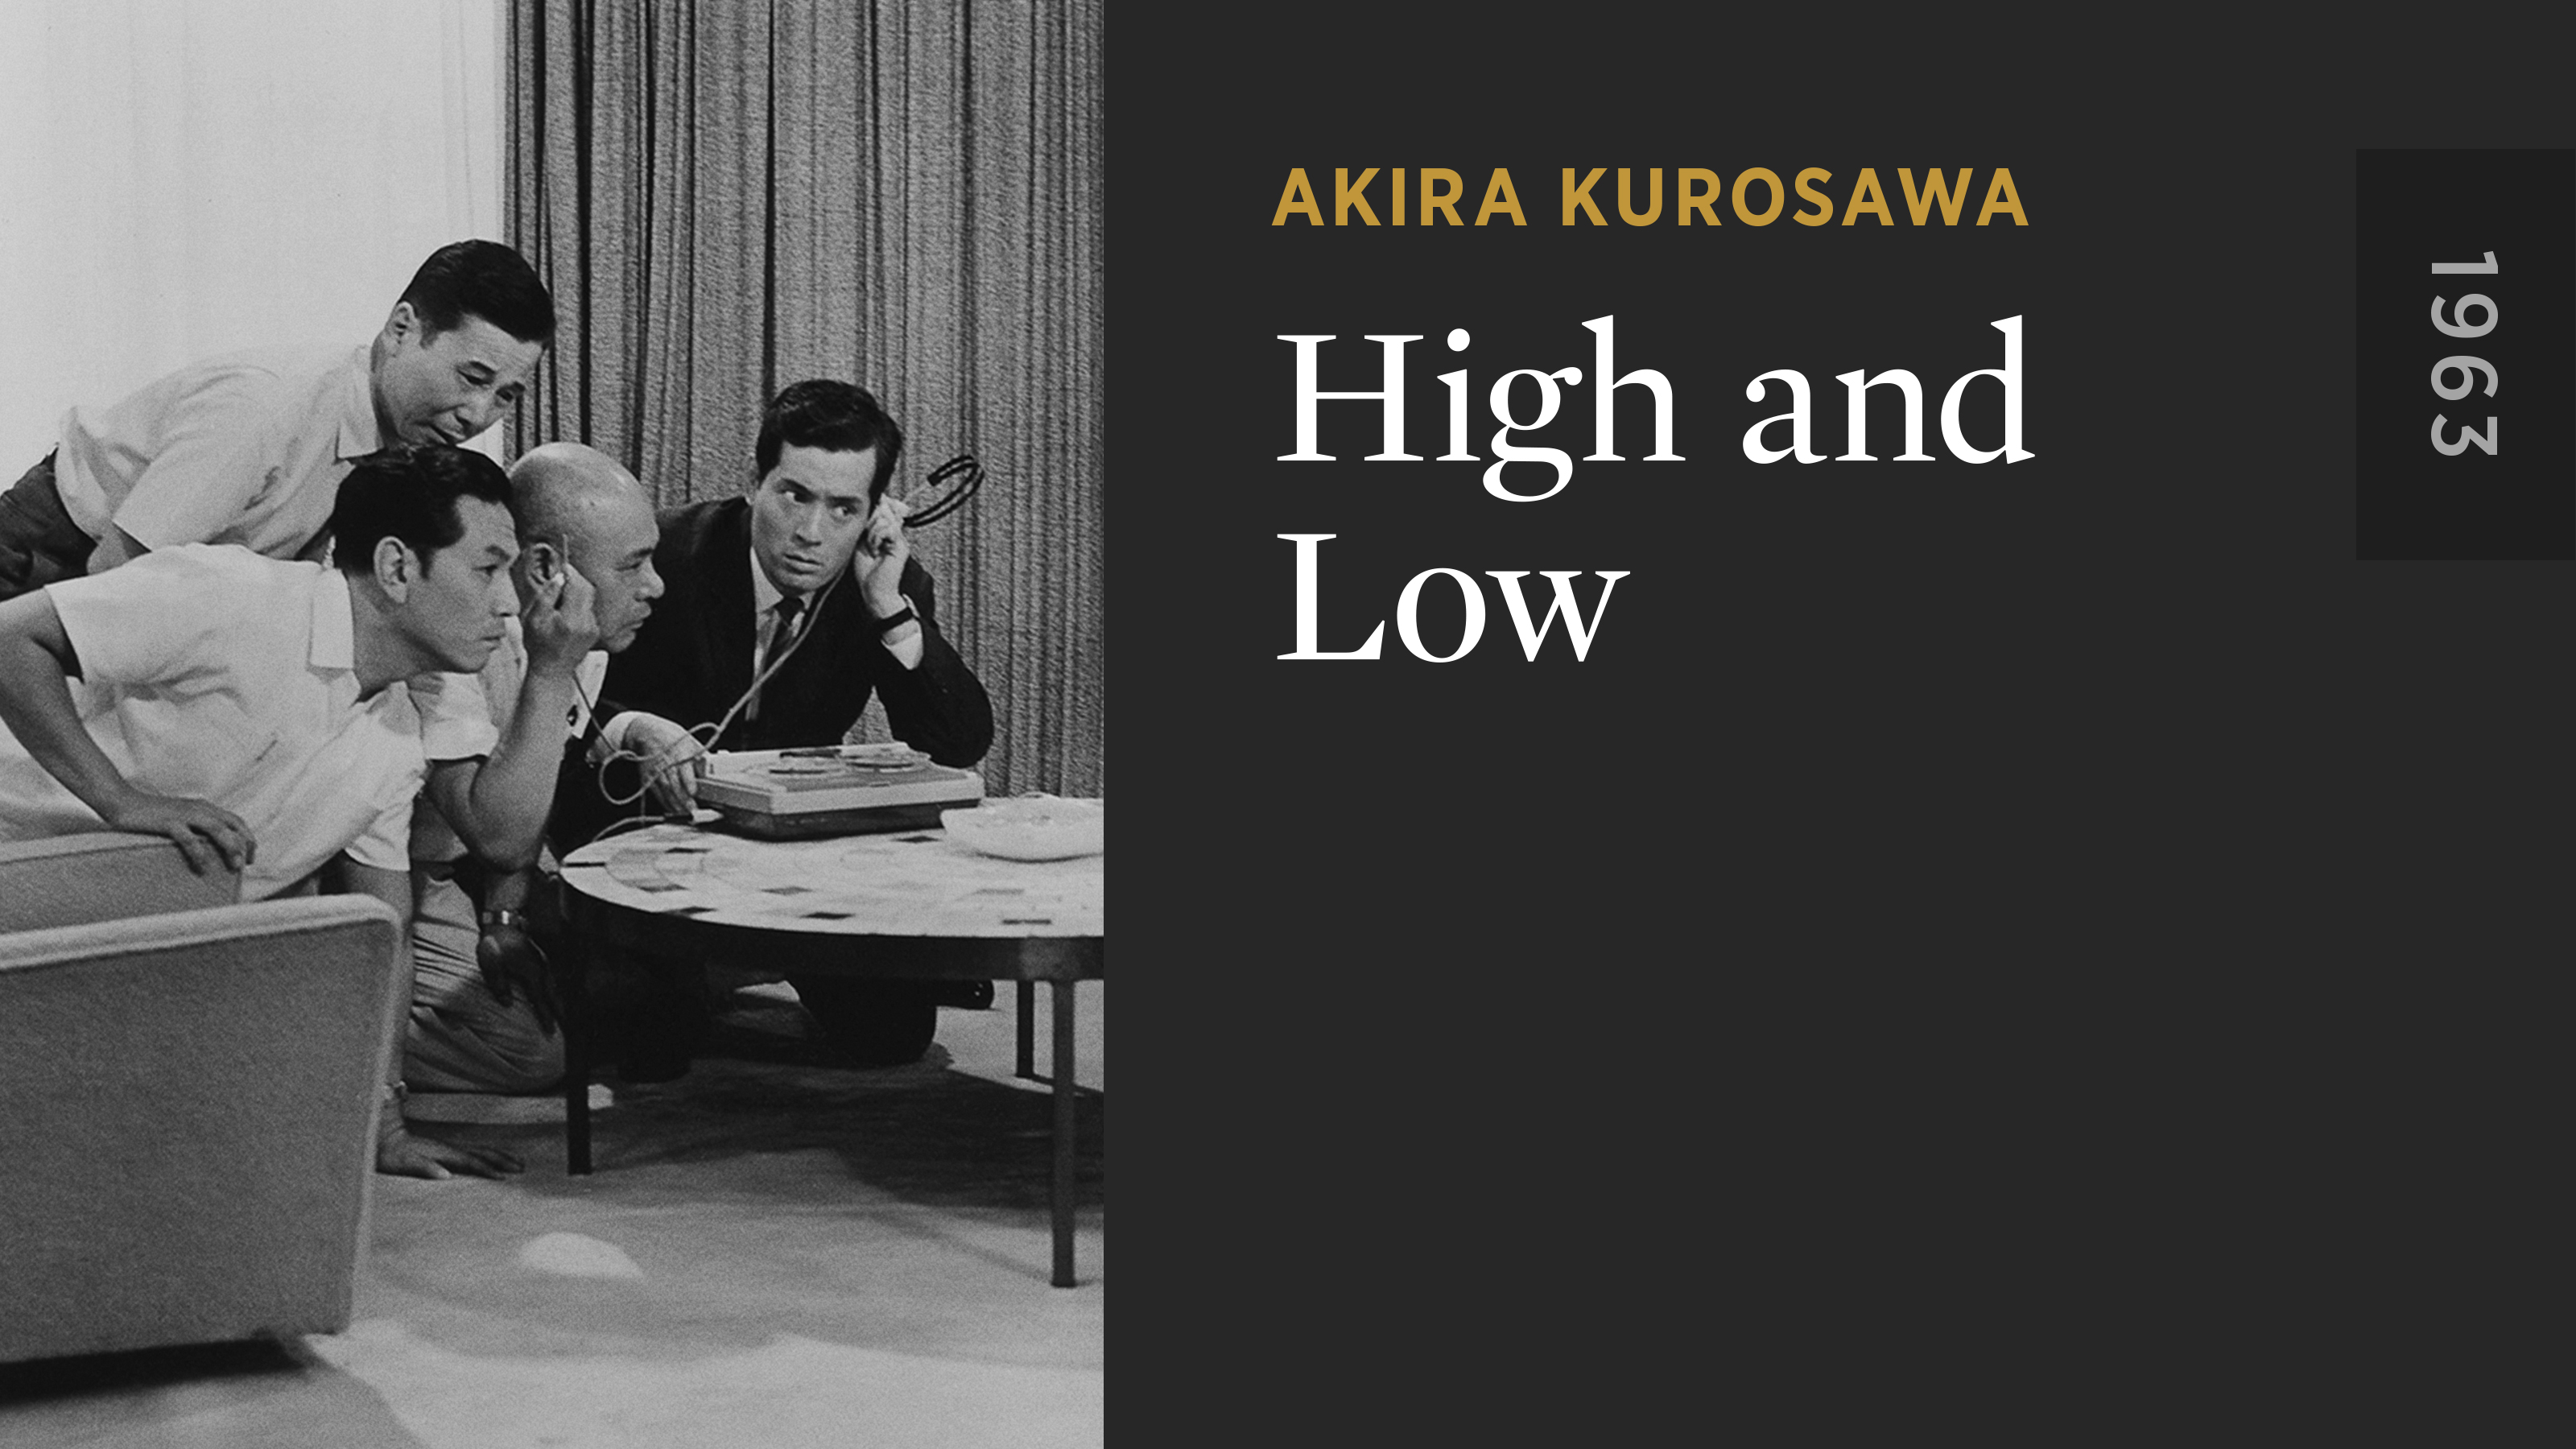 Criterion Collection: High & Low (黒澤明 天国と地獄 北米版) [Blu-ray]